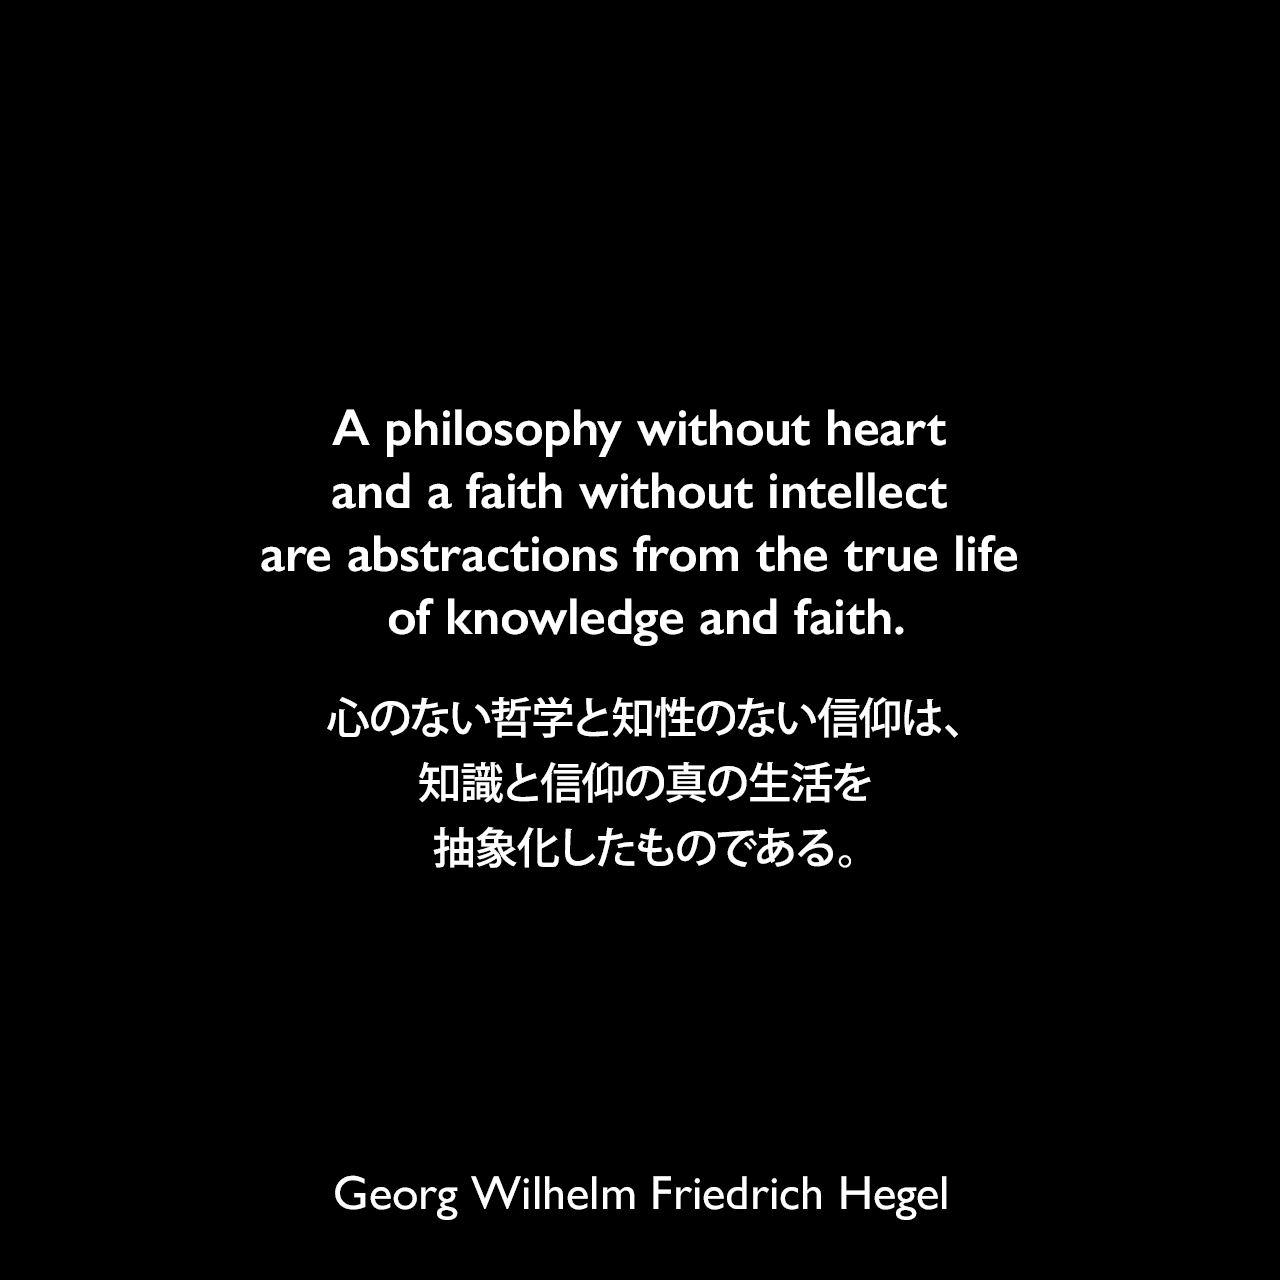 A philosophy without heart and a faith without intellect are abstractions from the true life of knowledge and faith.心のない哲学と知性のない信仰は、知識と信仰の真の生活を抽象化したものである。- ヘーゲルによる本「Encyclopedia of the Philosophical Sciences」よりGeorg Wilhelm Friedrich Hegel